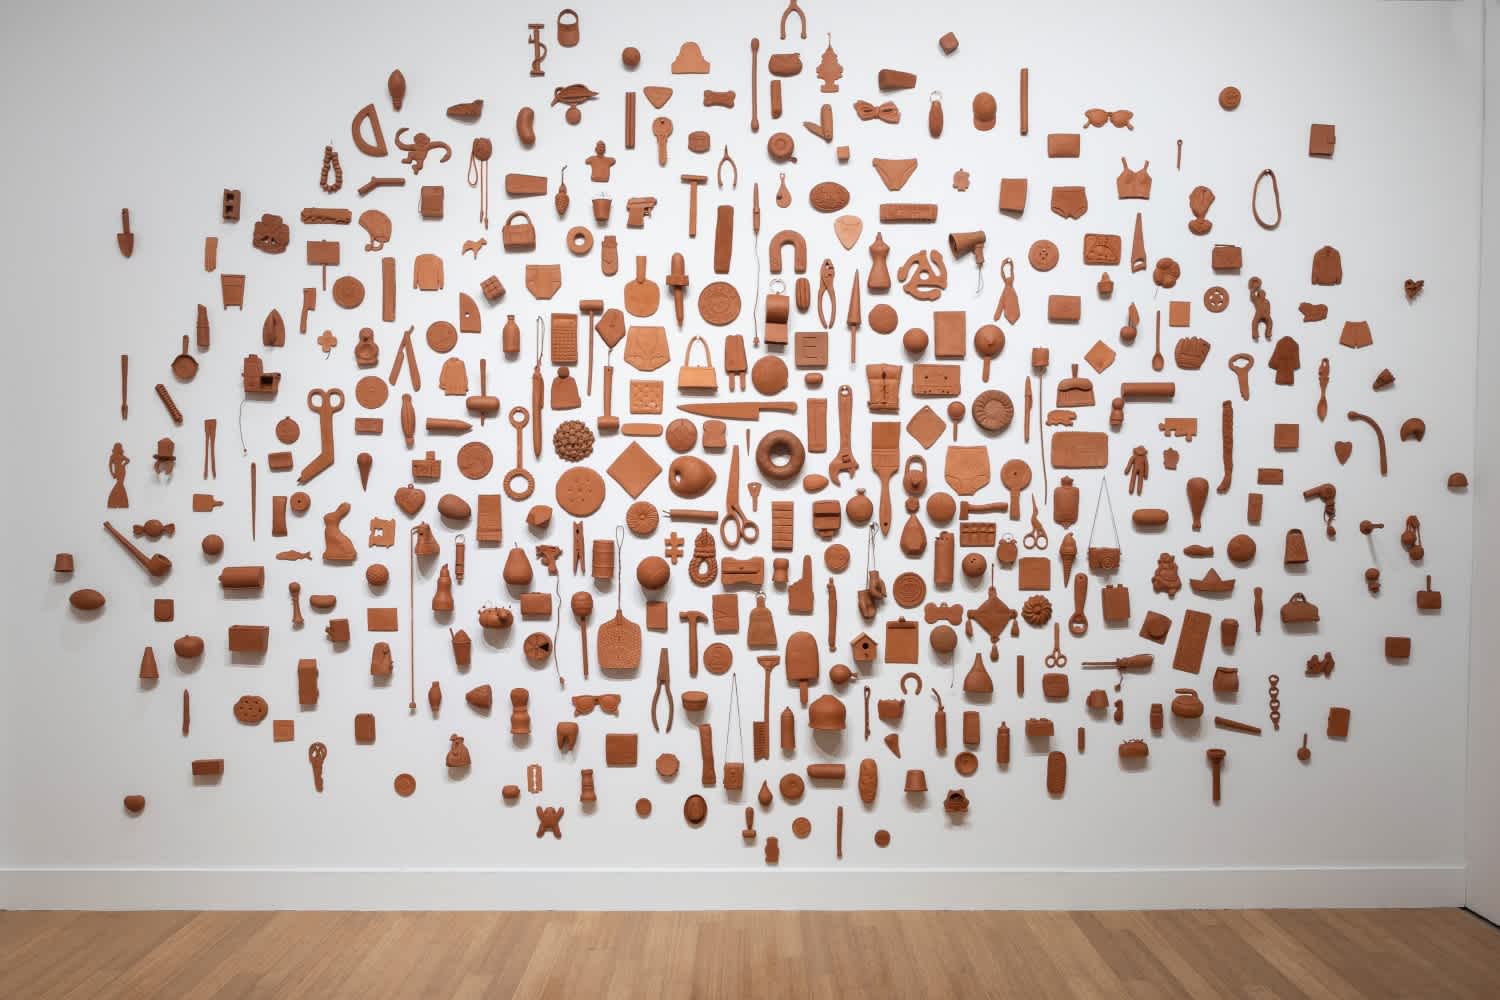 Every Day I Think of You by Pattie Chalmers, an installation of 365 terracotta objects covering an entire gallery wall at the Virginia Museum of Contemporary Art (Virginia MOCA). Featured in the exhibition Shaping Memories: Expressions in Clay.